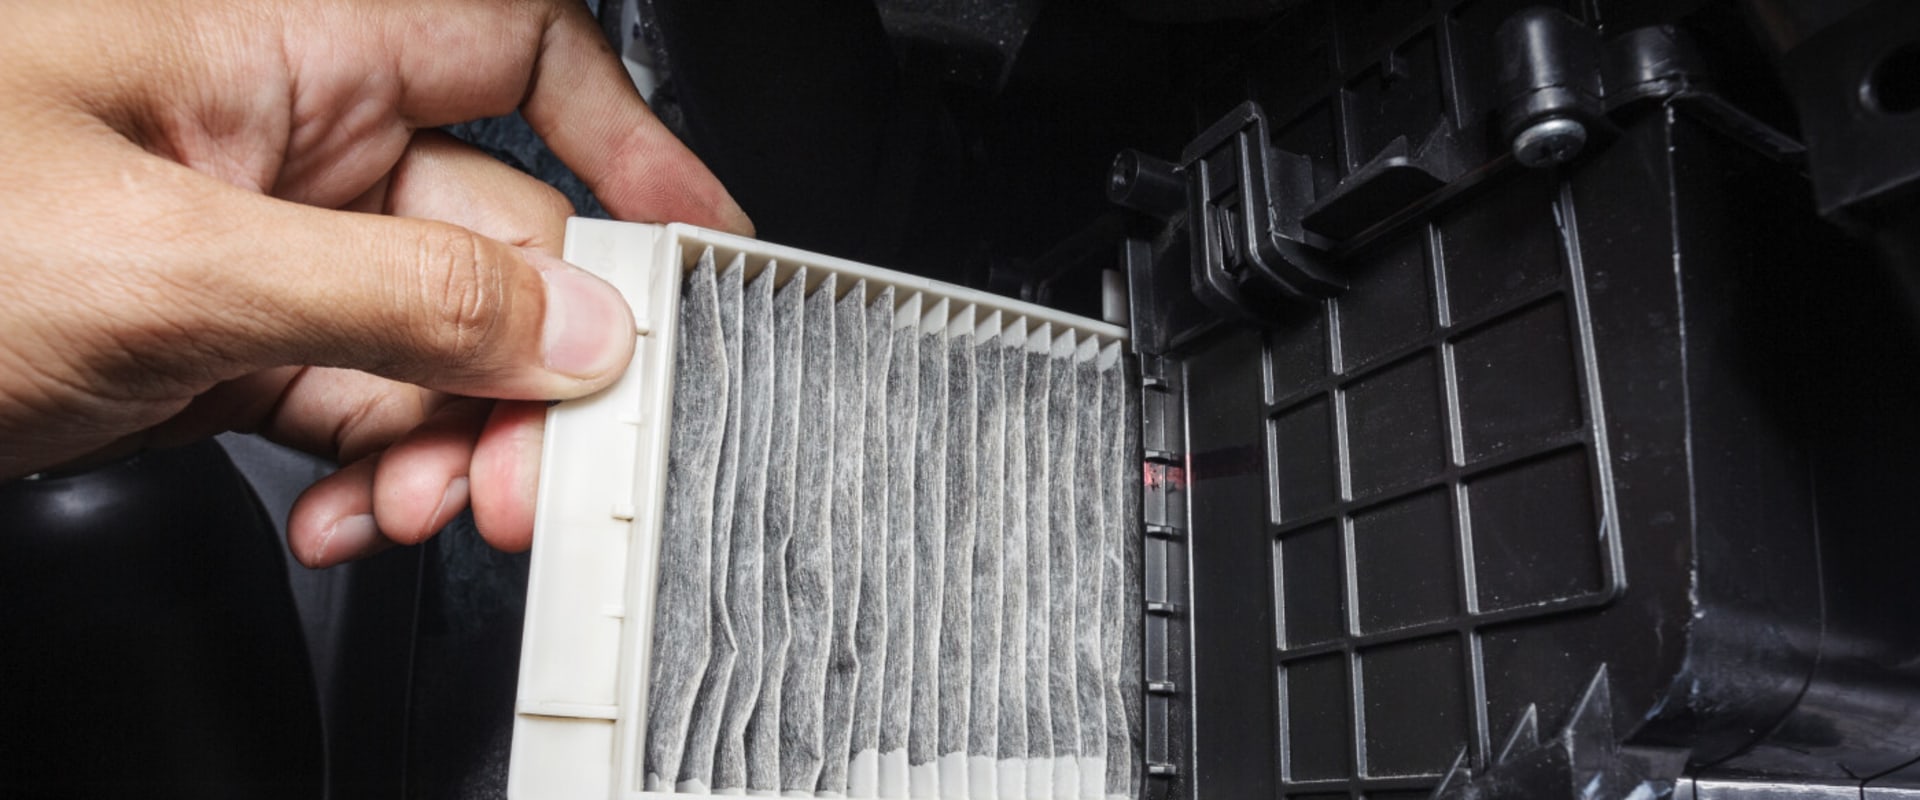 How Often Should You Change Your Honda Civic's Cabin Air Filter?